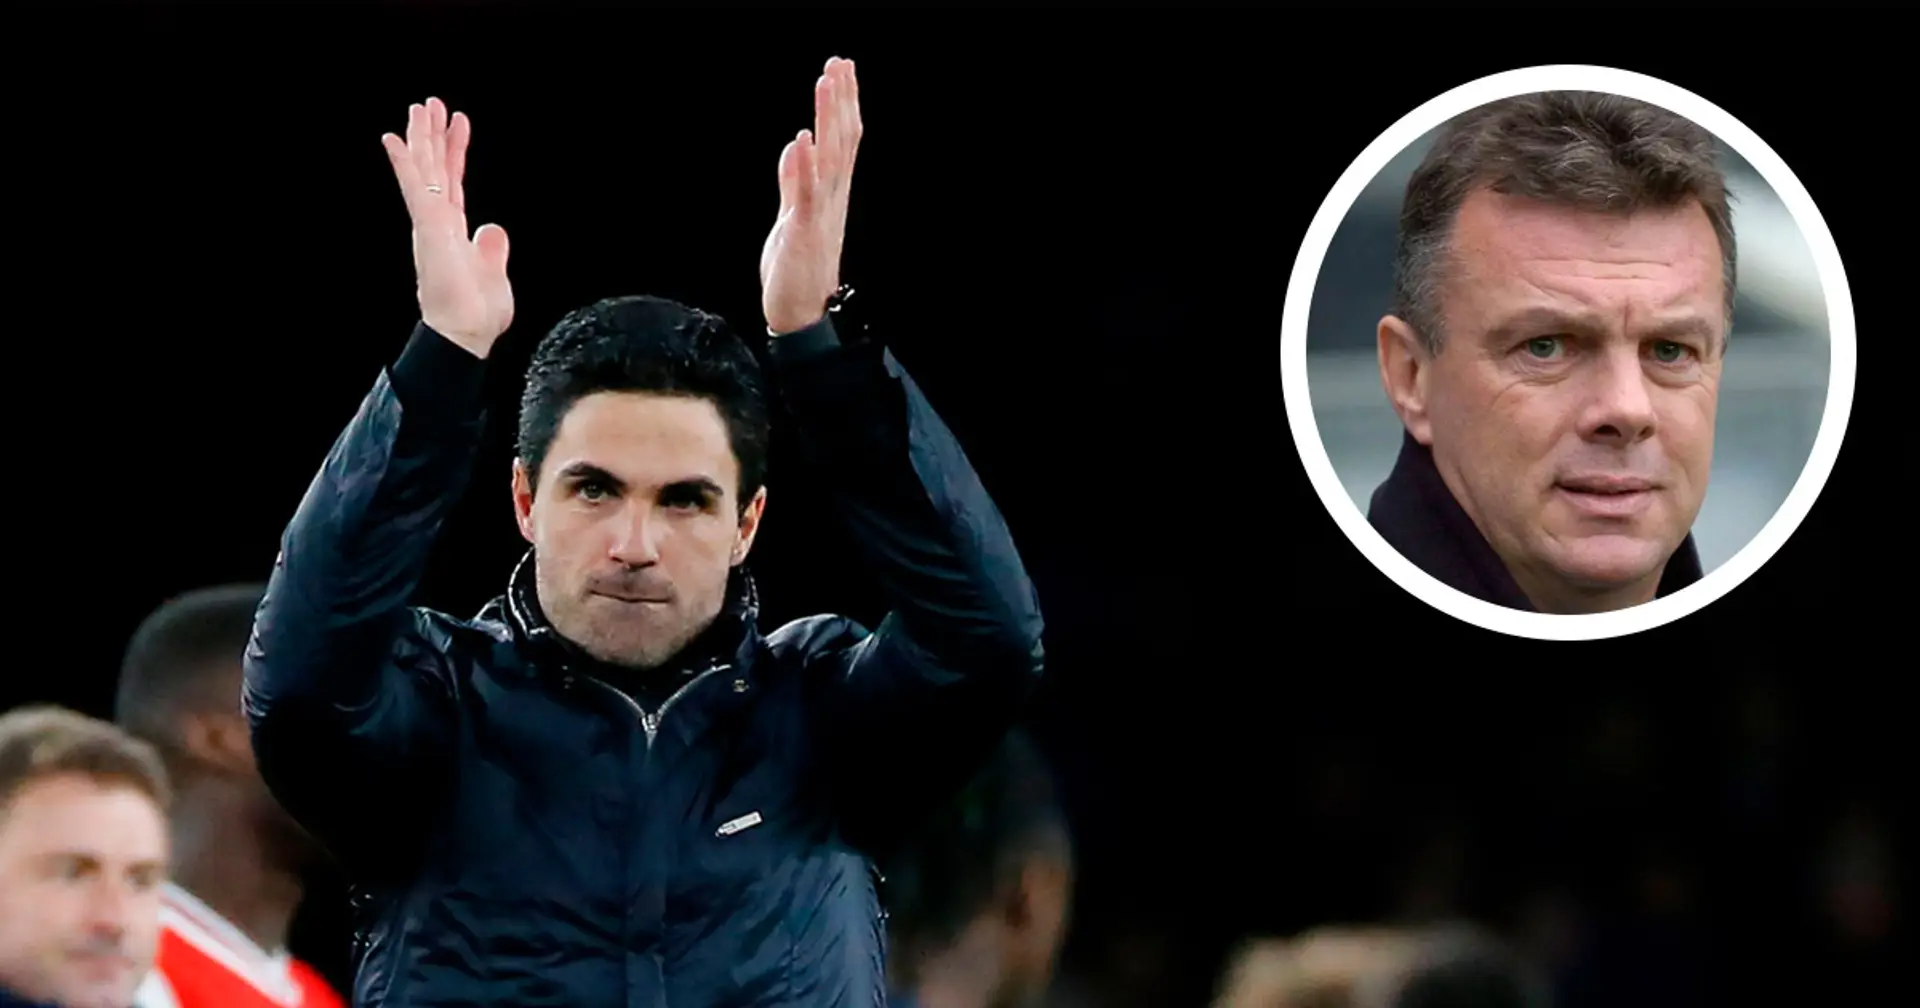 O'Leary hails 'absolutely fantastic' Arteta but warns Arsenal need new signings to make top 4